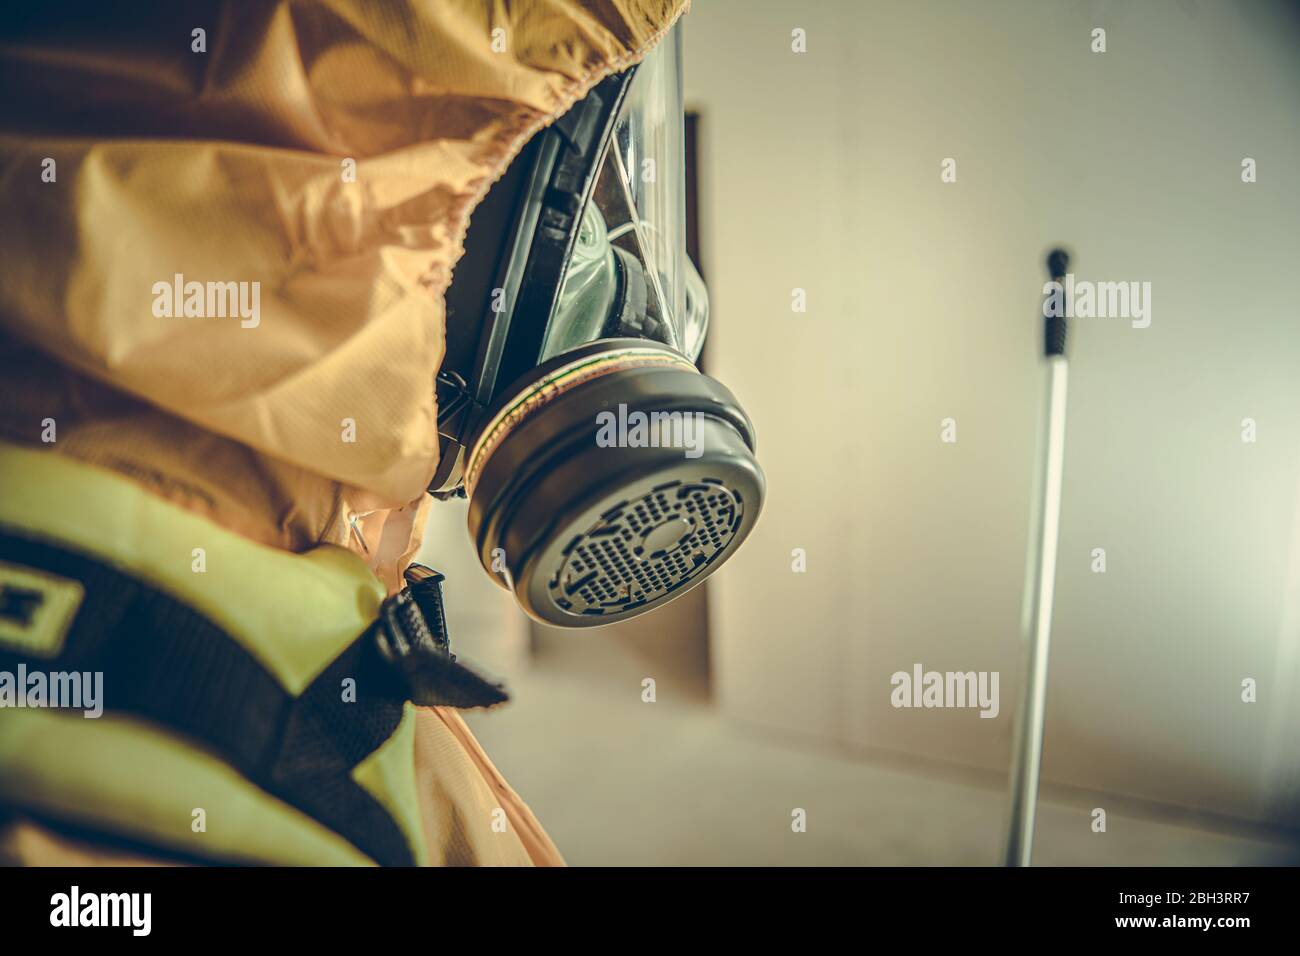 Close Up Of Worker In Hazmat Suit Mask And Spray Nozzle Cleaning Hazardous Waste. Stock Photo